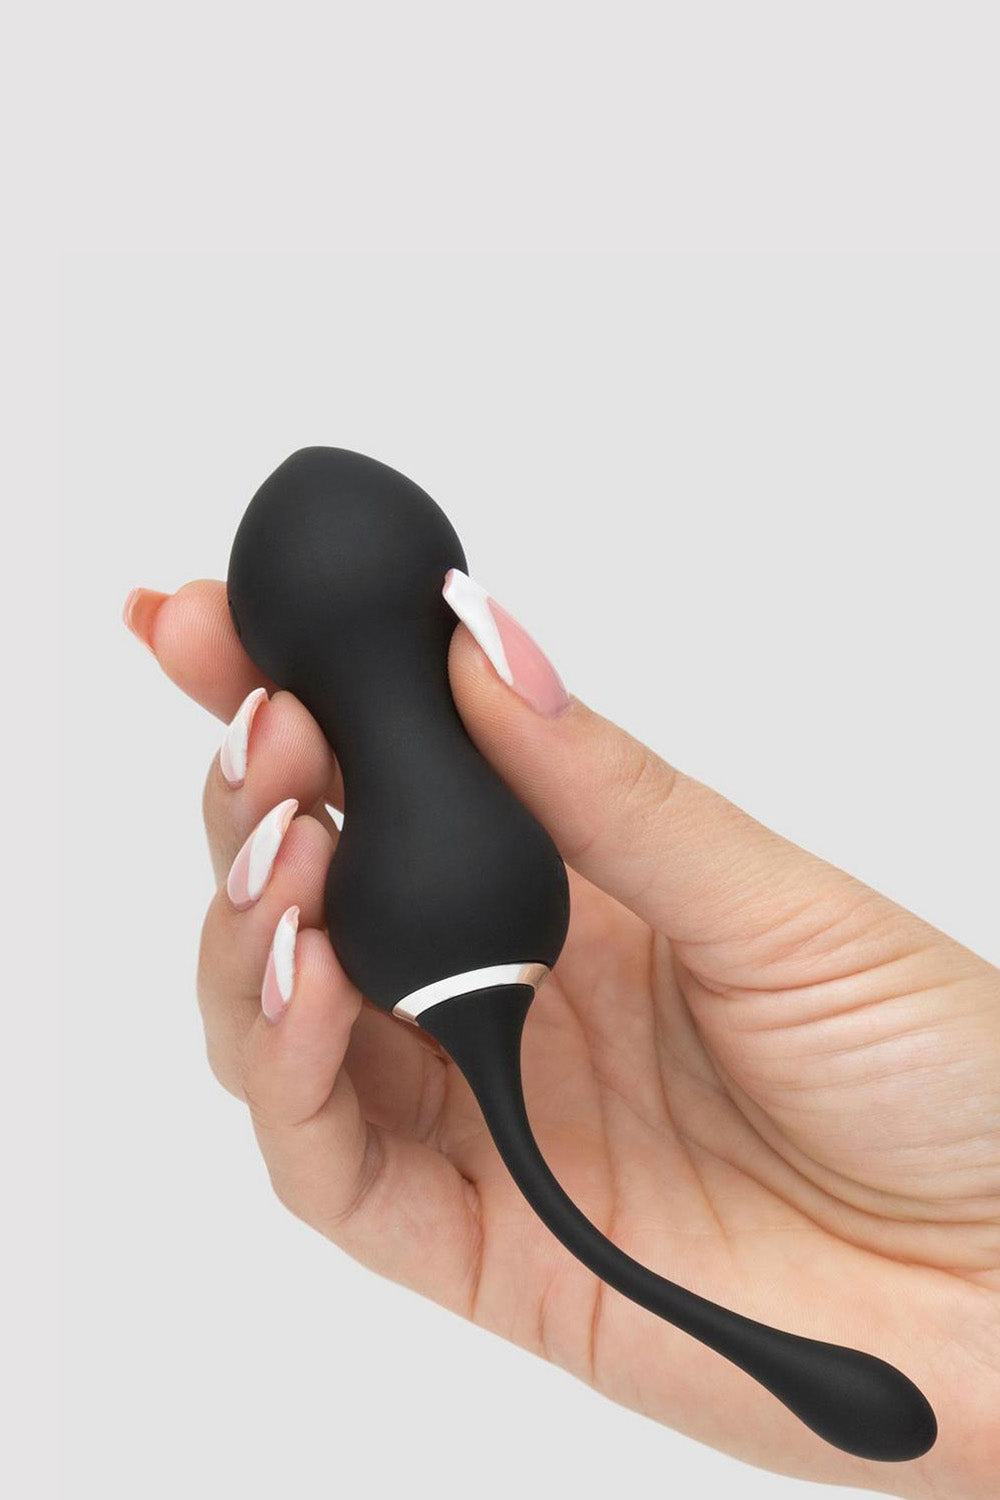 Fifty Shades of Grey Relentless Vibrations Remote Control Kegel Balls